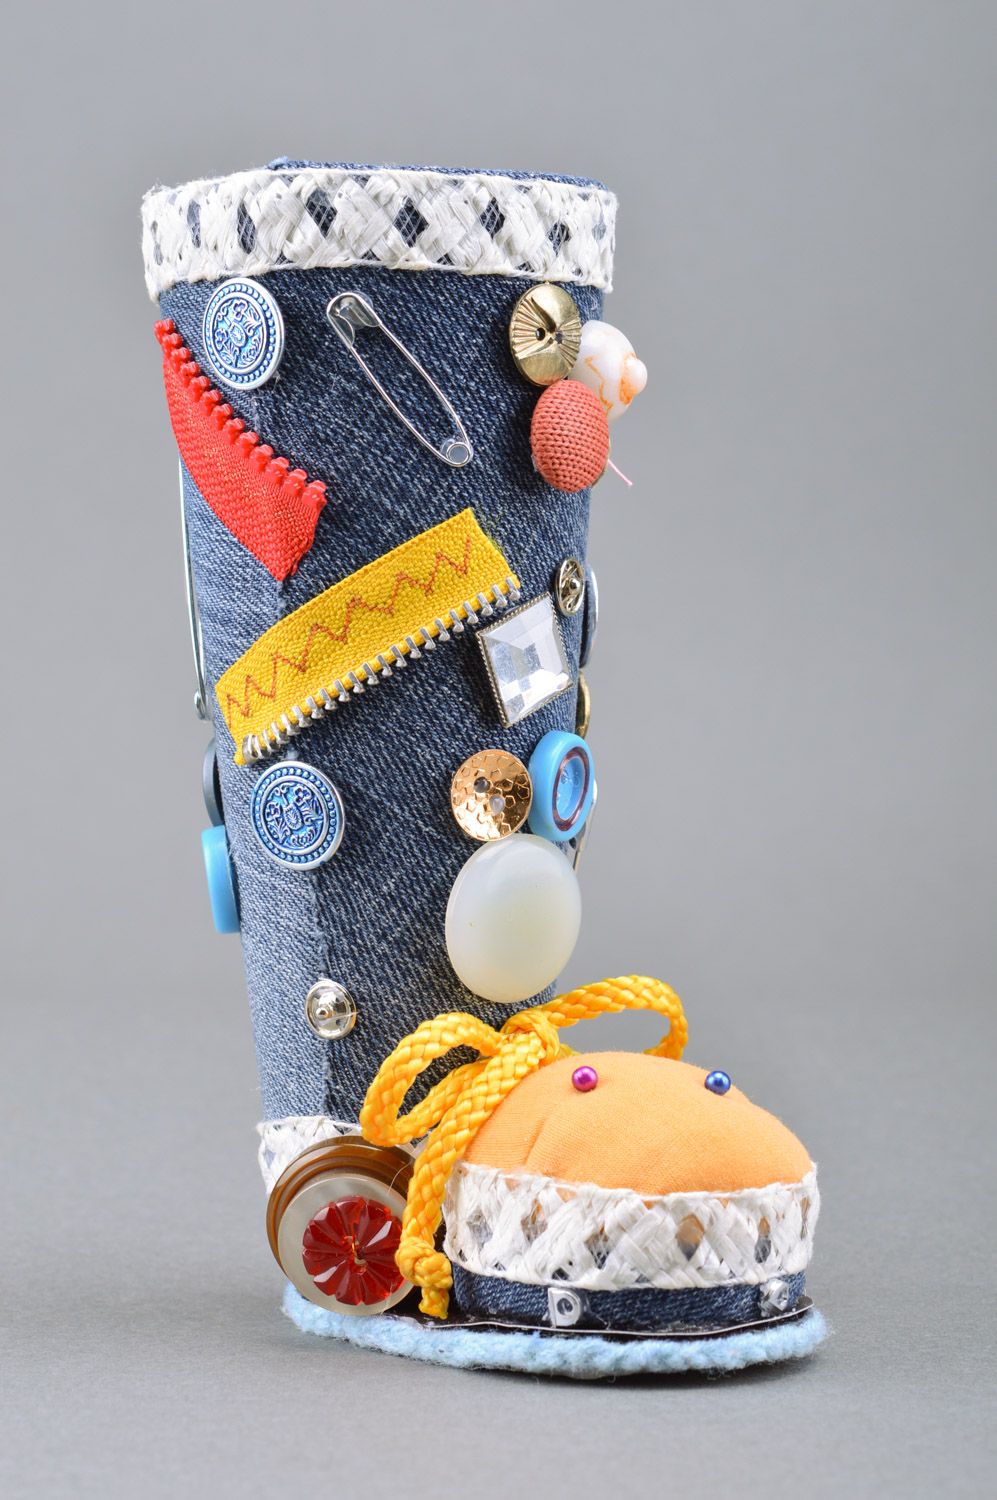 Handmade decorative denim organizer for sewing supplies and pincushion in one photo 5